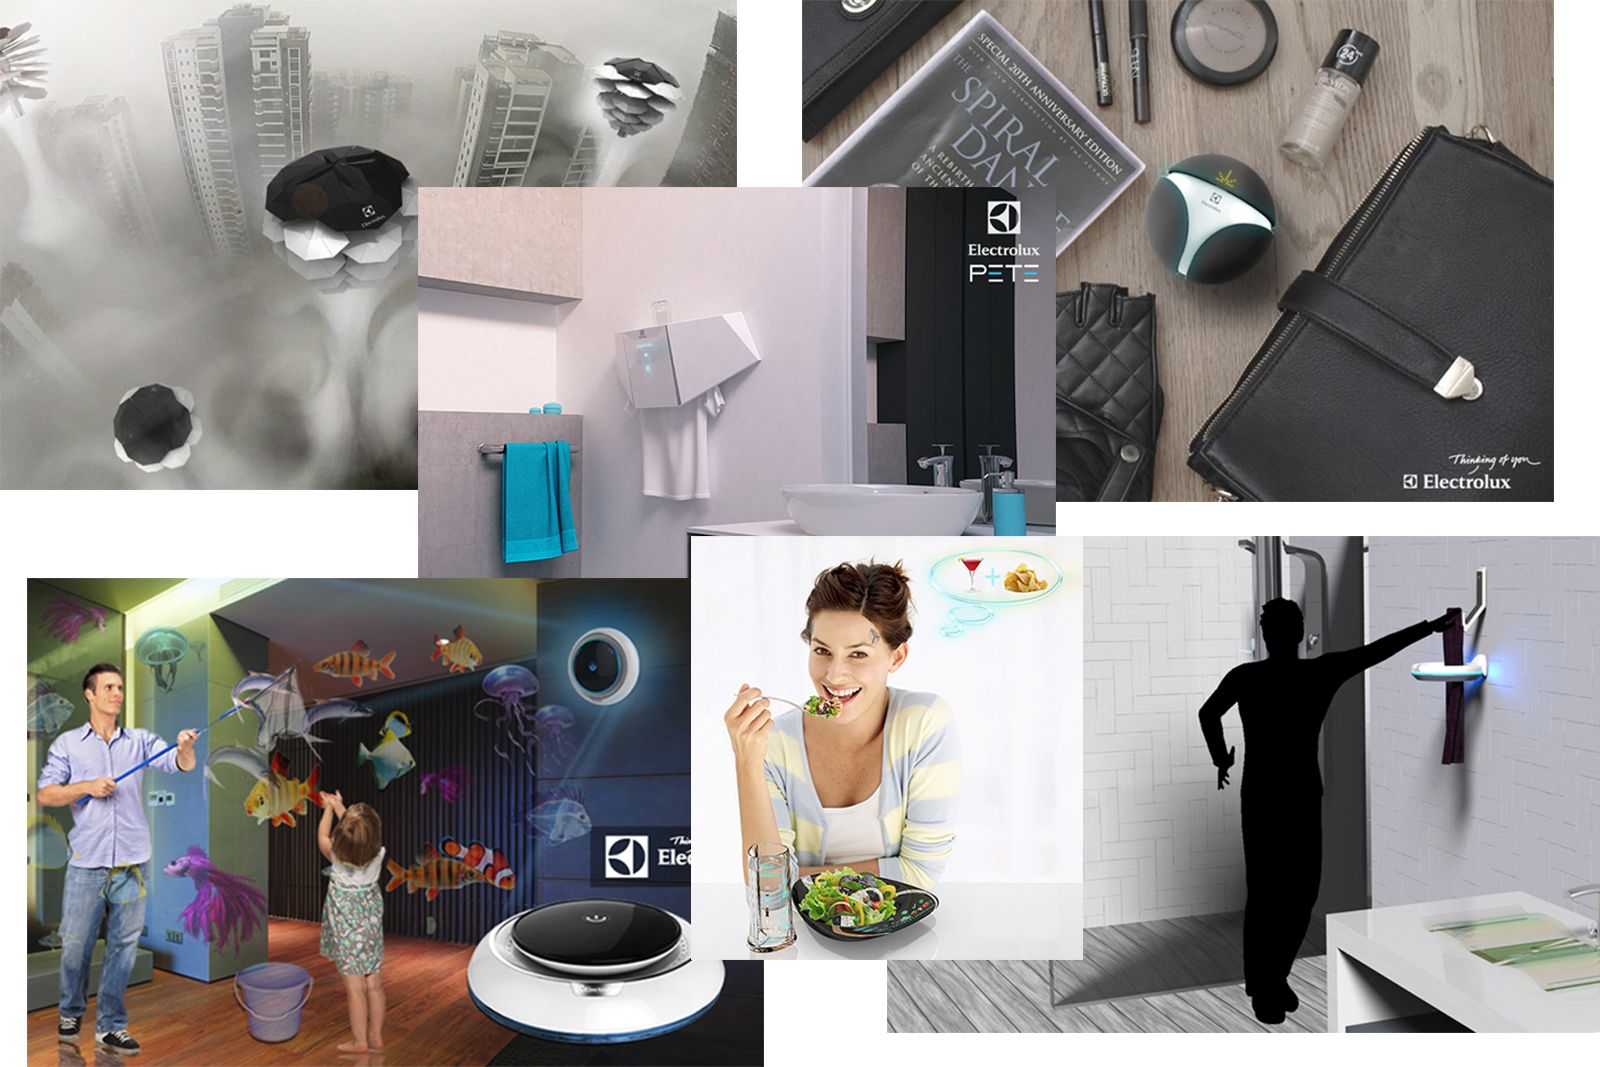 electrolux design lab finalists present what the future of your home could look like image 1